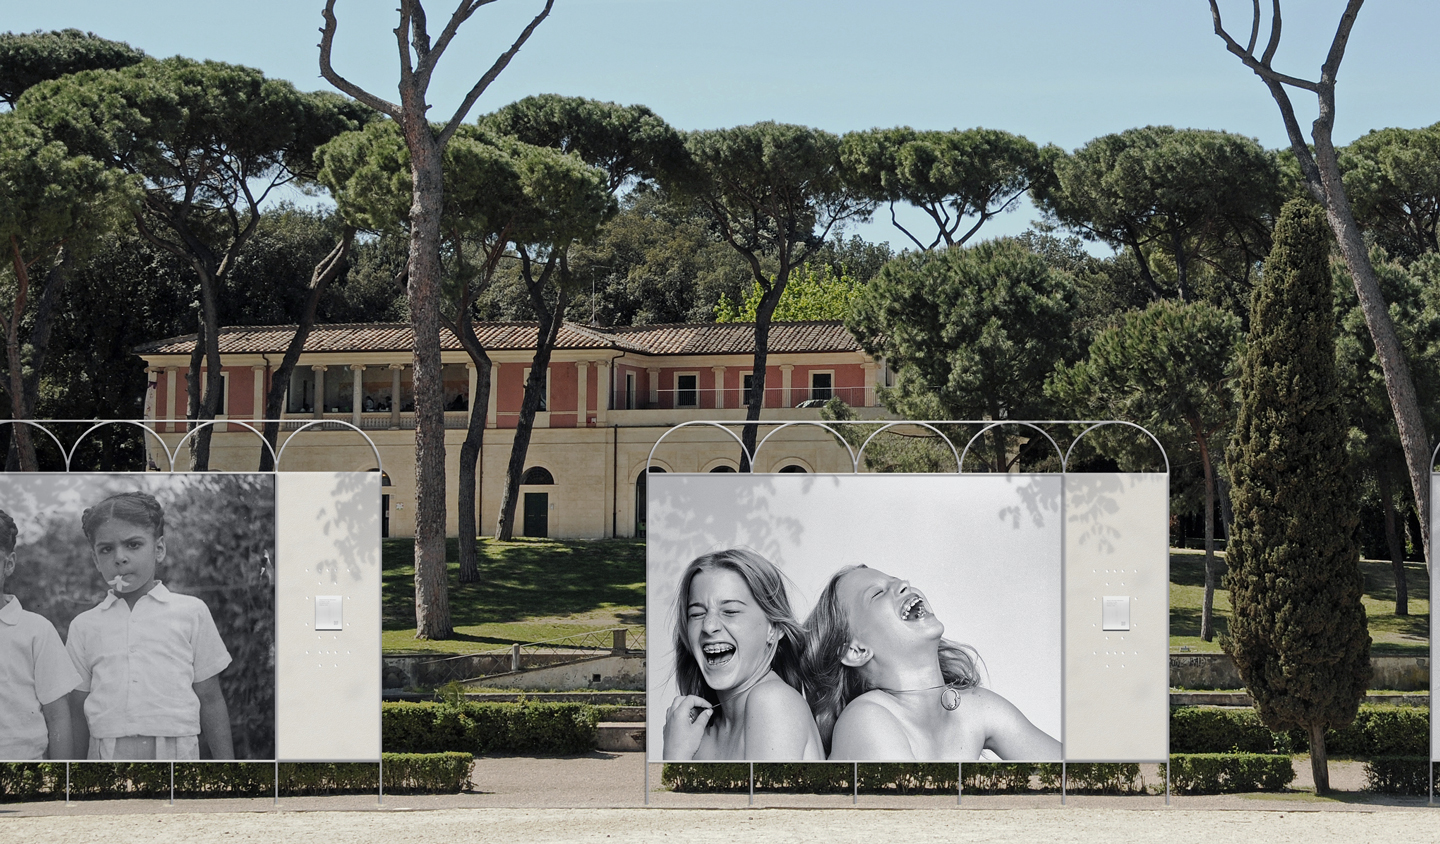 IM alumnus Giacomo De Maggi also developed an outdoor exhibition for his degree project The Aesthetic of Truth